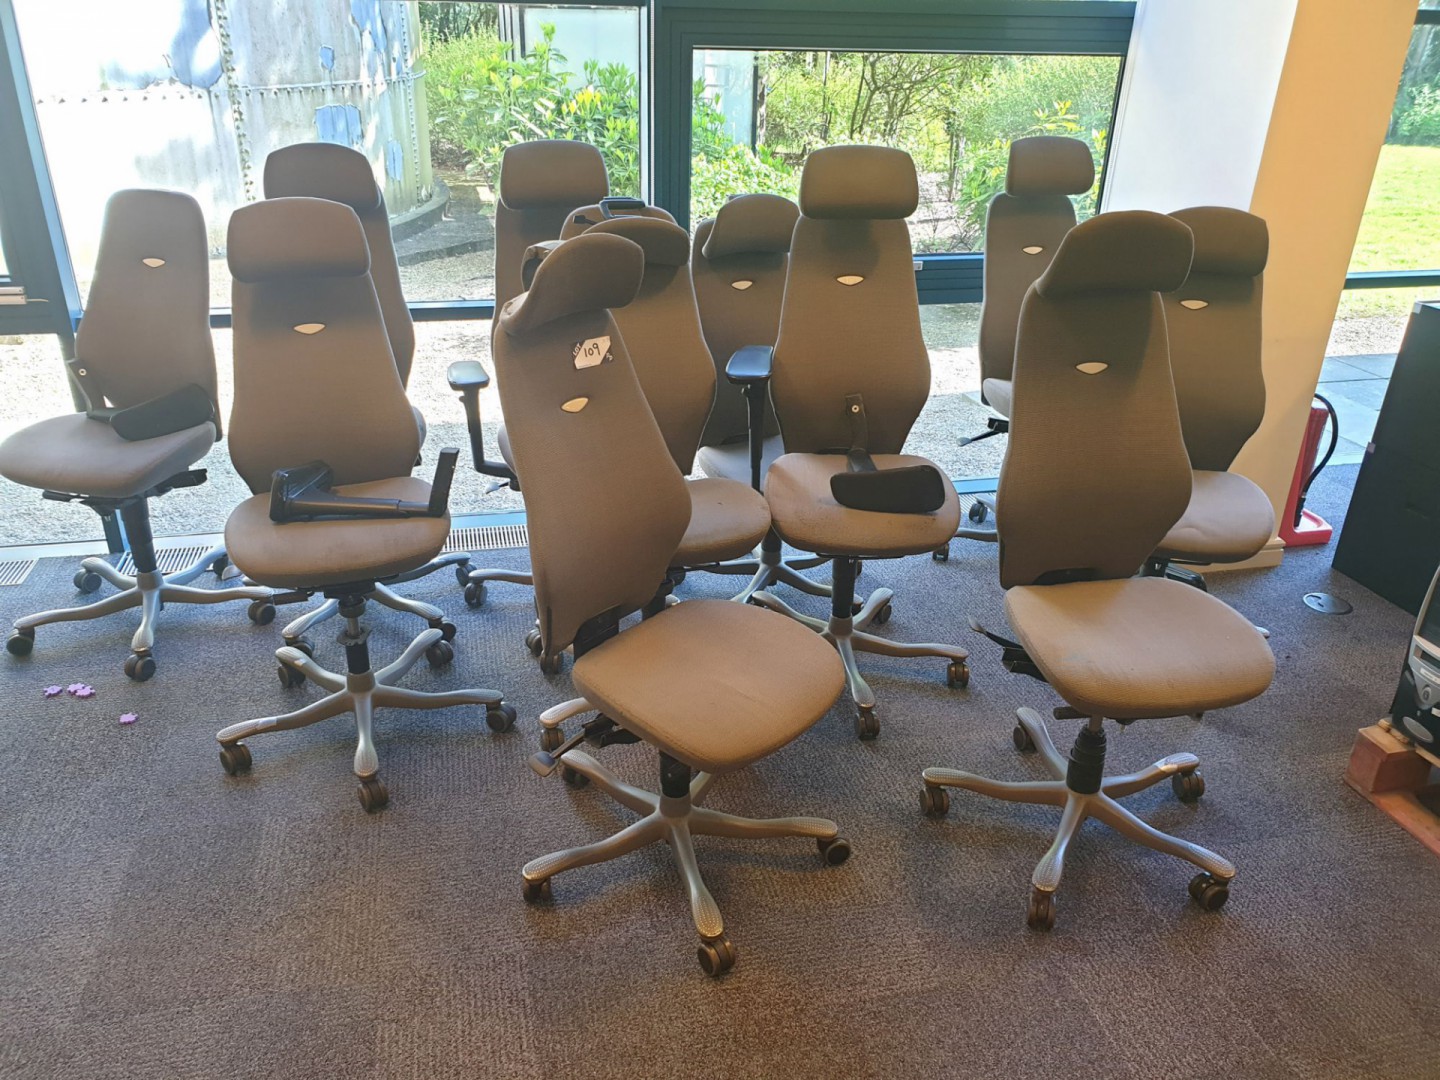 11x Kinnarps grey upholstered swivel office chairs...